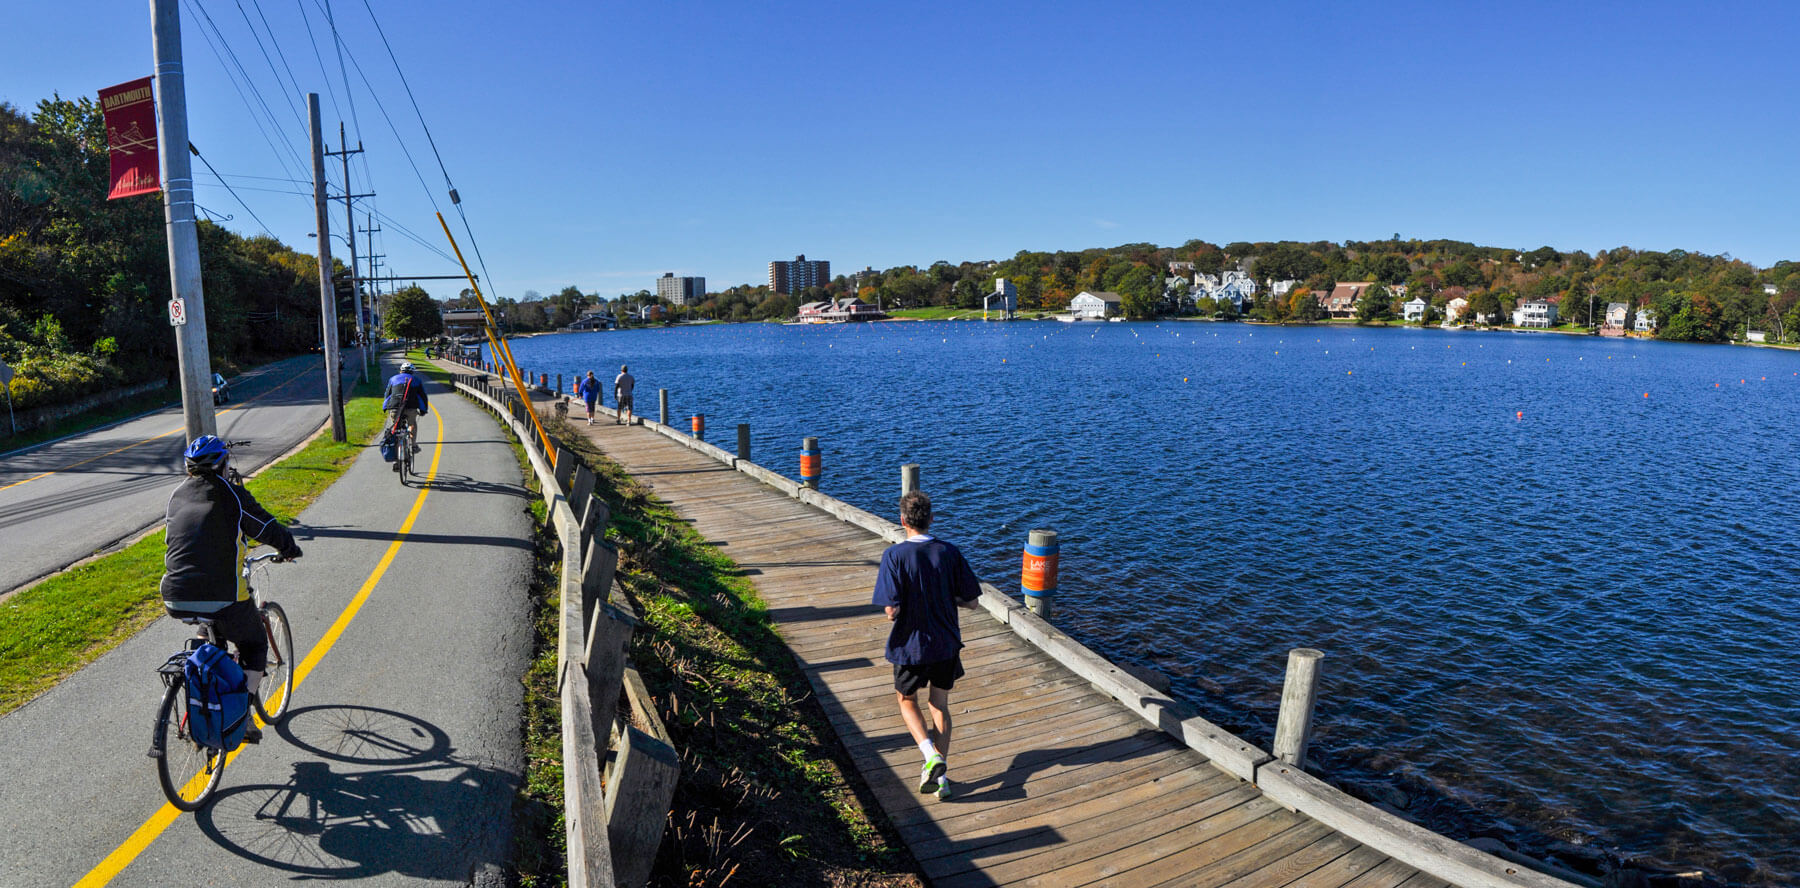 Two people cycle on the multi-use pathway next to Lake Banook in fall. A person runs next to them on the boardwalk.